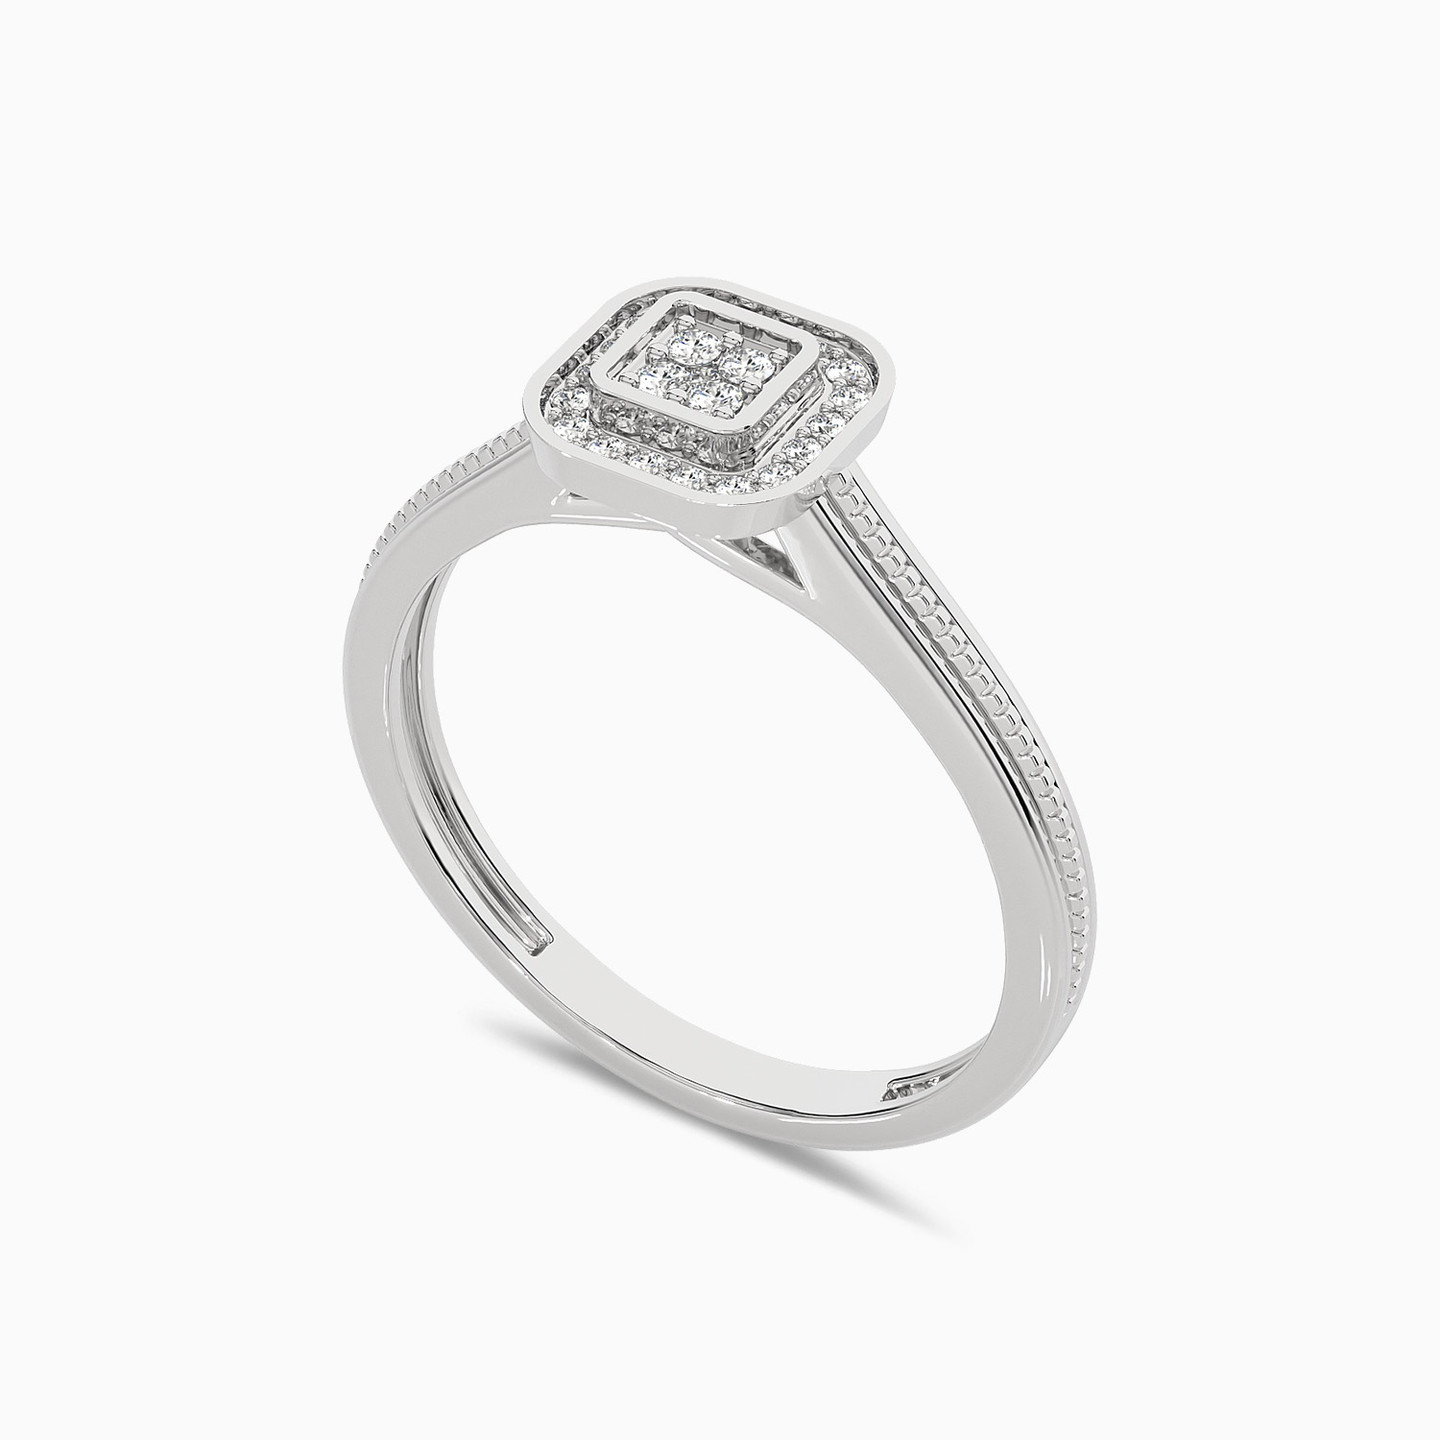 Square Shaped Diamond Statement Ring in 18K Gold - 2